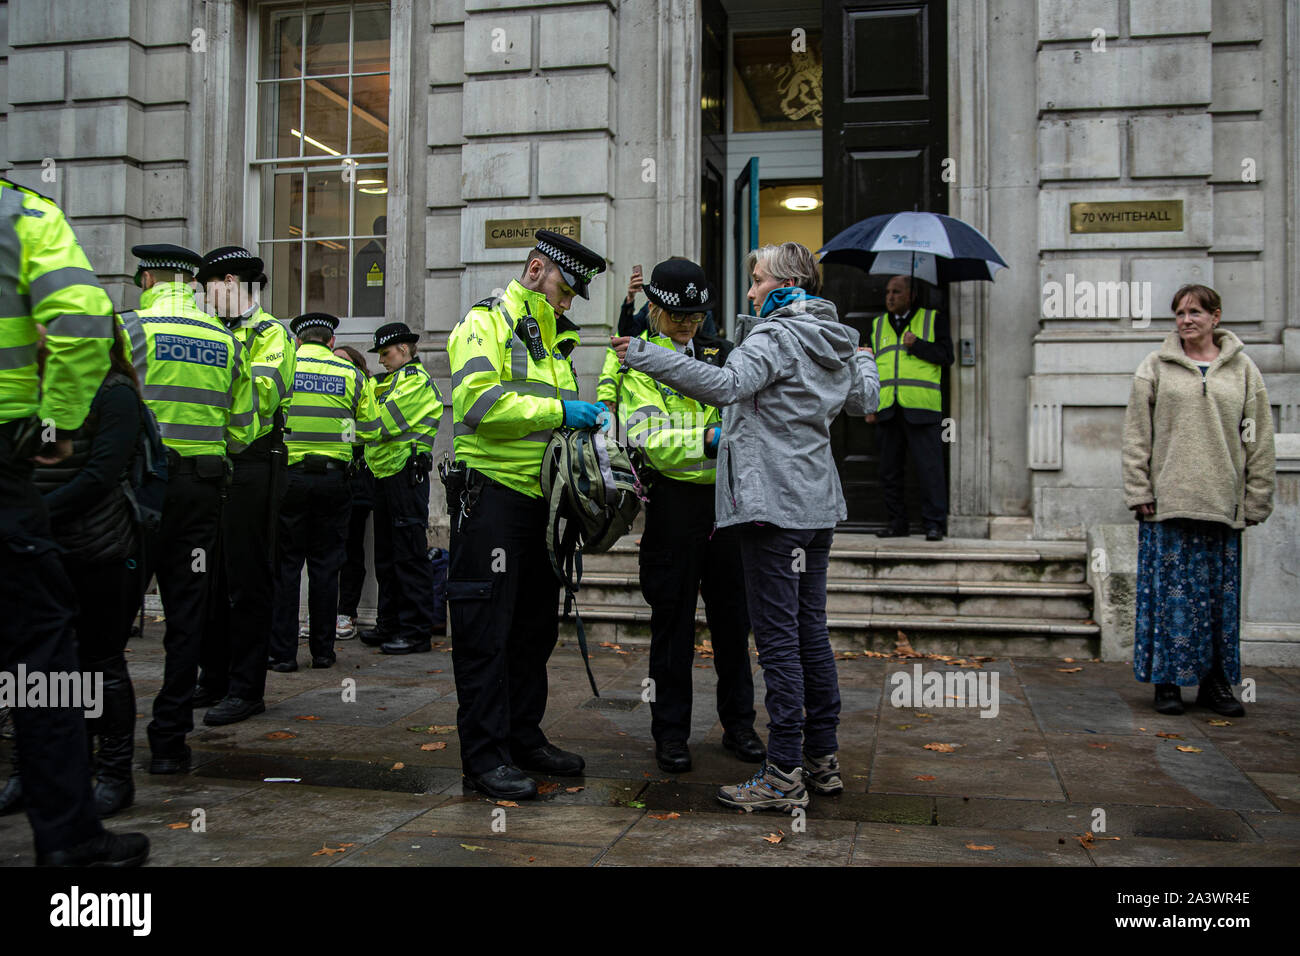 A woman is questioned by police after being arrested for blocking the street in Whitehall, central London, at the Extinction Rebellion protests.Protesters took to the street in central London across this week and next week to highlight the 'climate emergency' facing the planet. Stock Photo